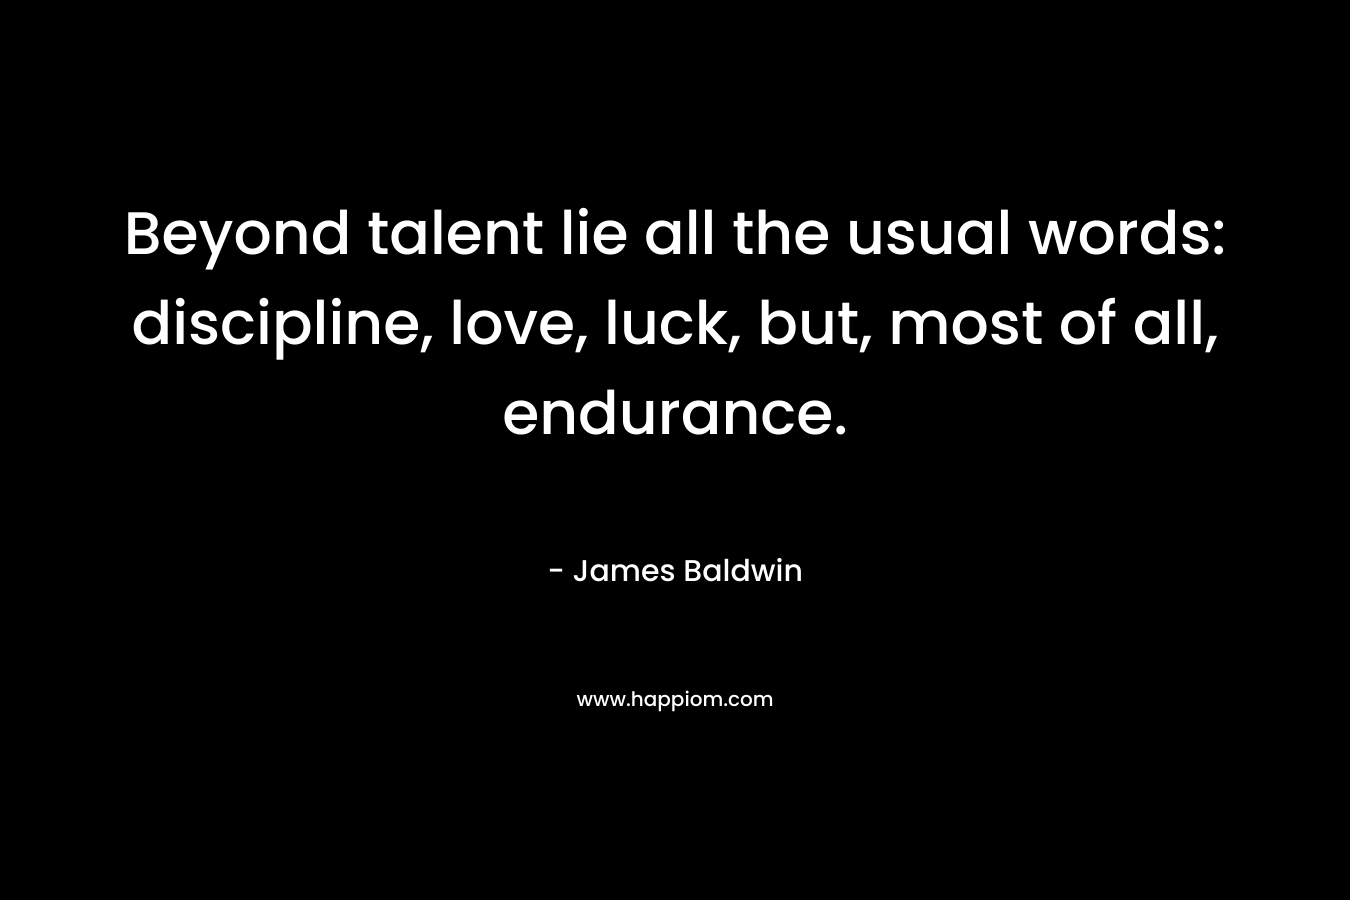 Beyond talent lie all the usual words: discipline, love, luck, but, most of all, endurance. – James Baldwin